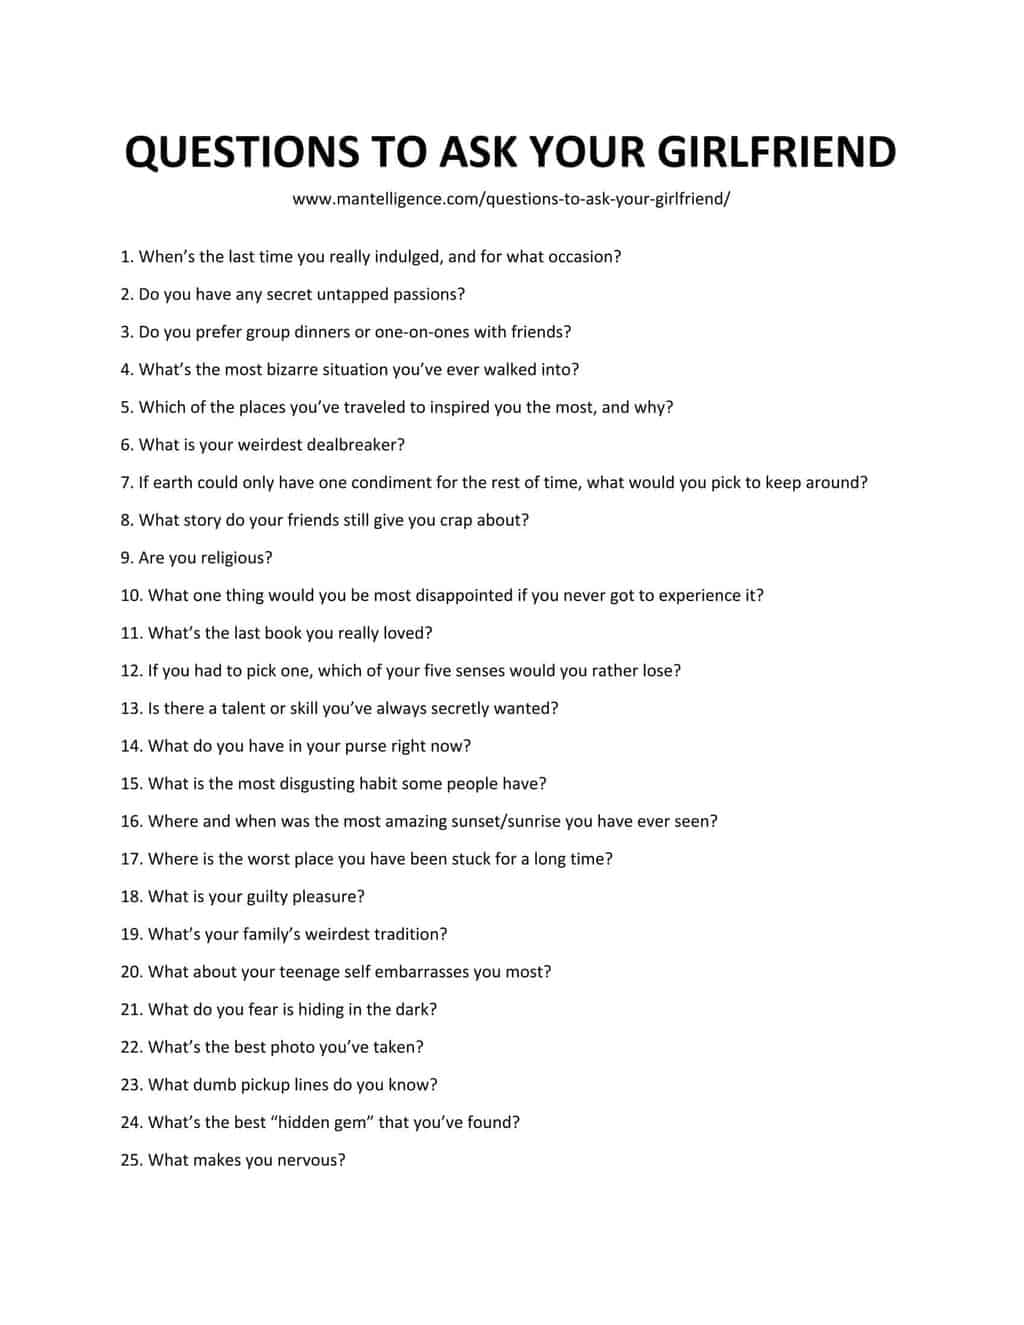 I should girlfriend my questions ask 100 Questions